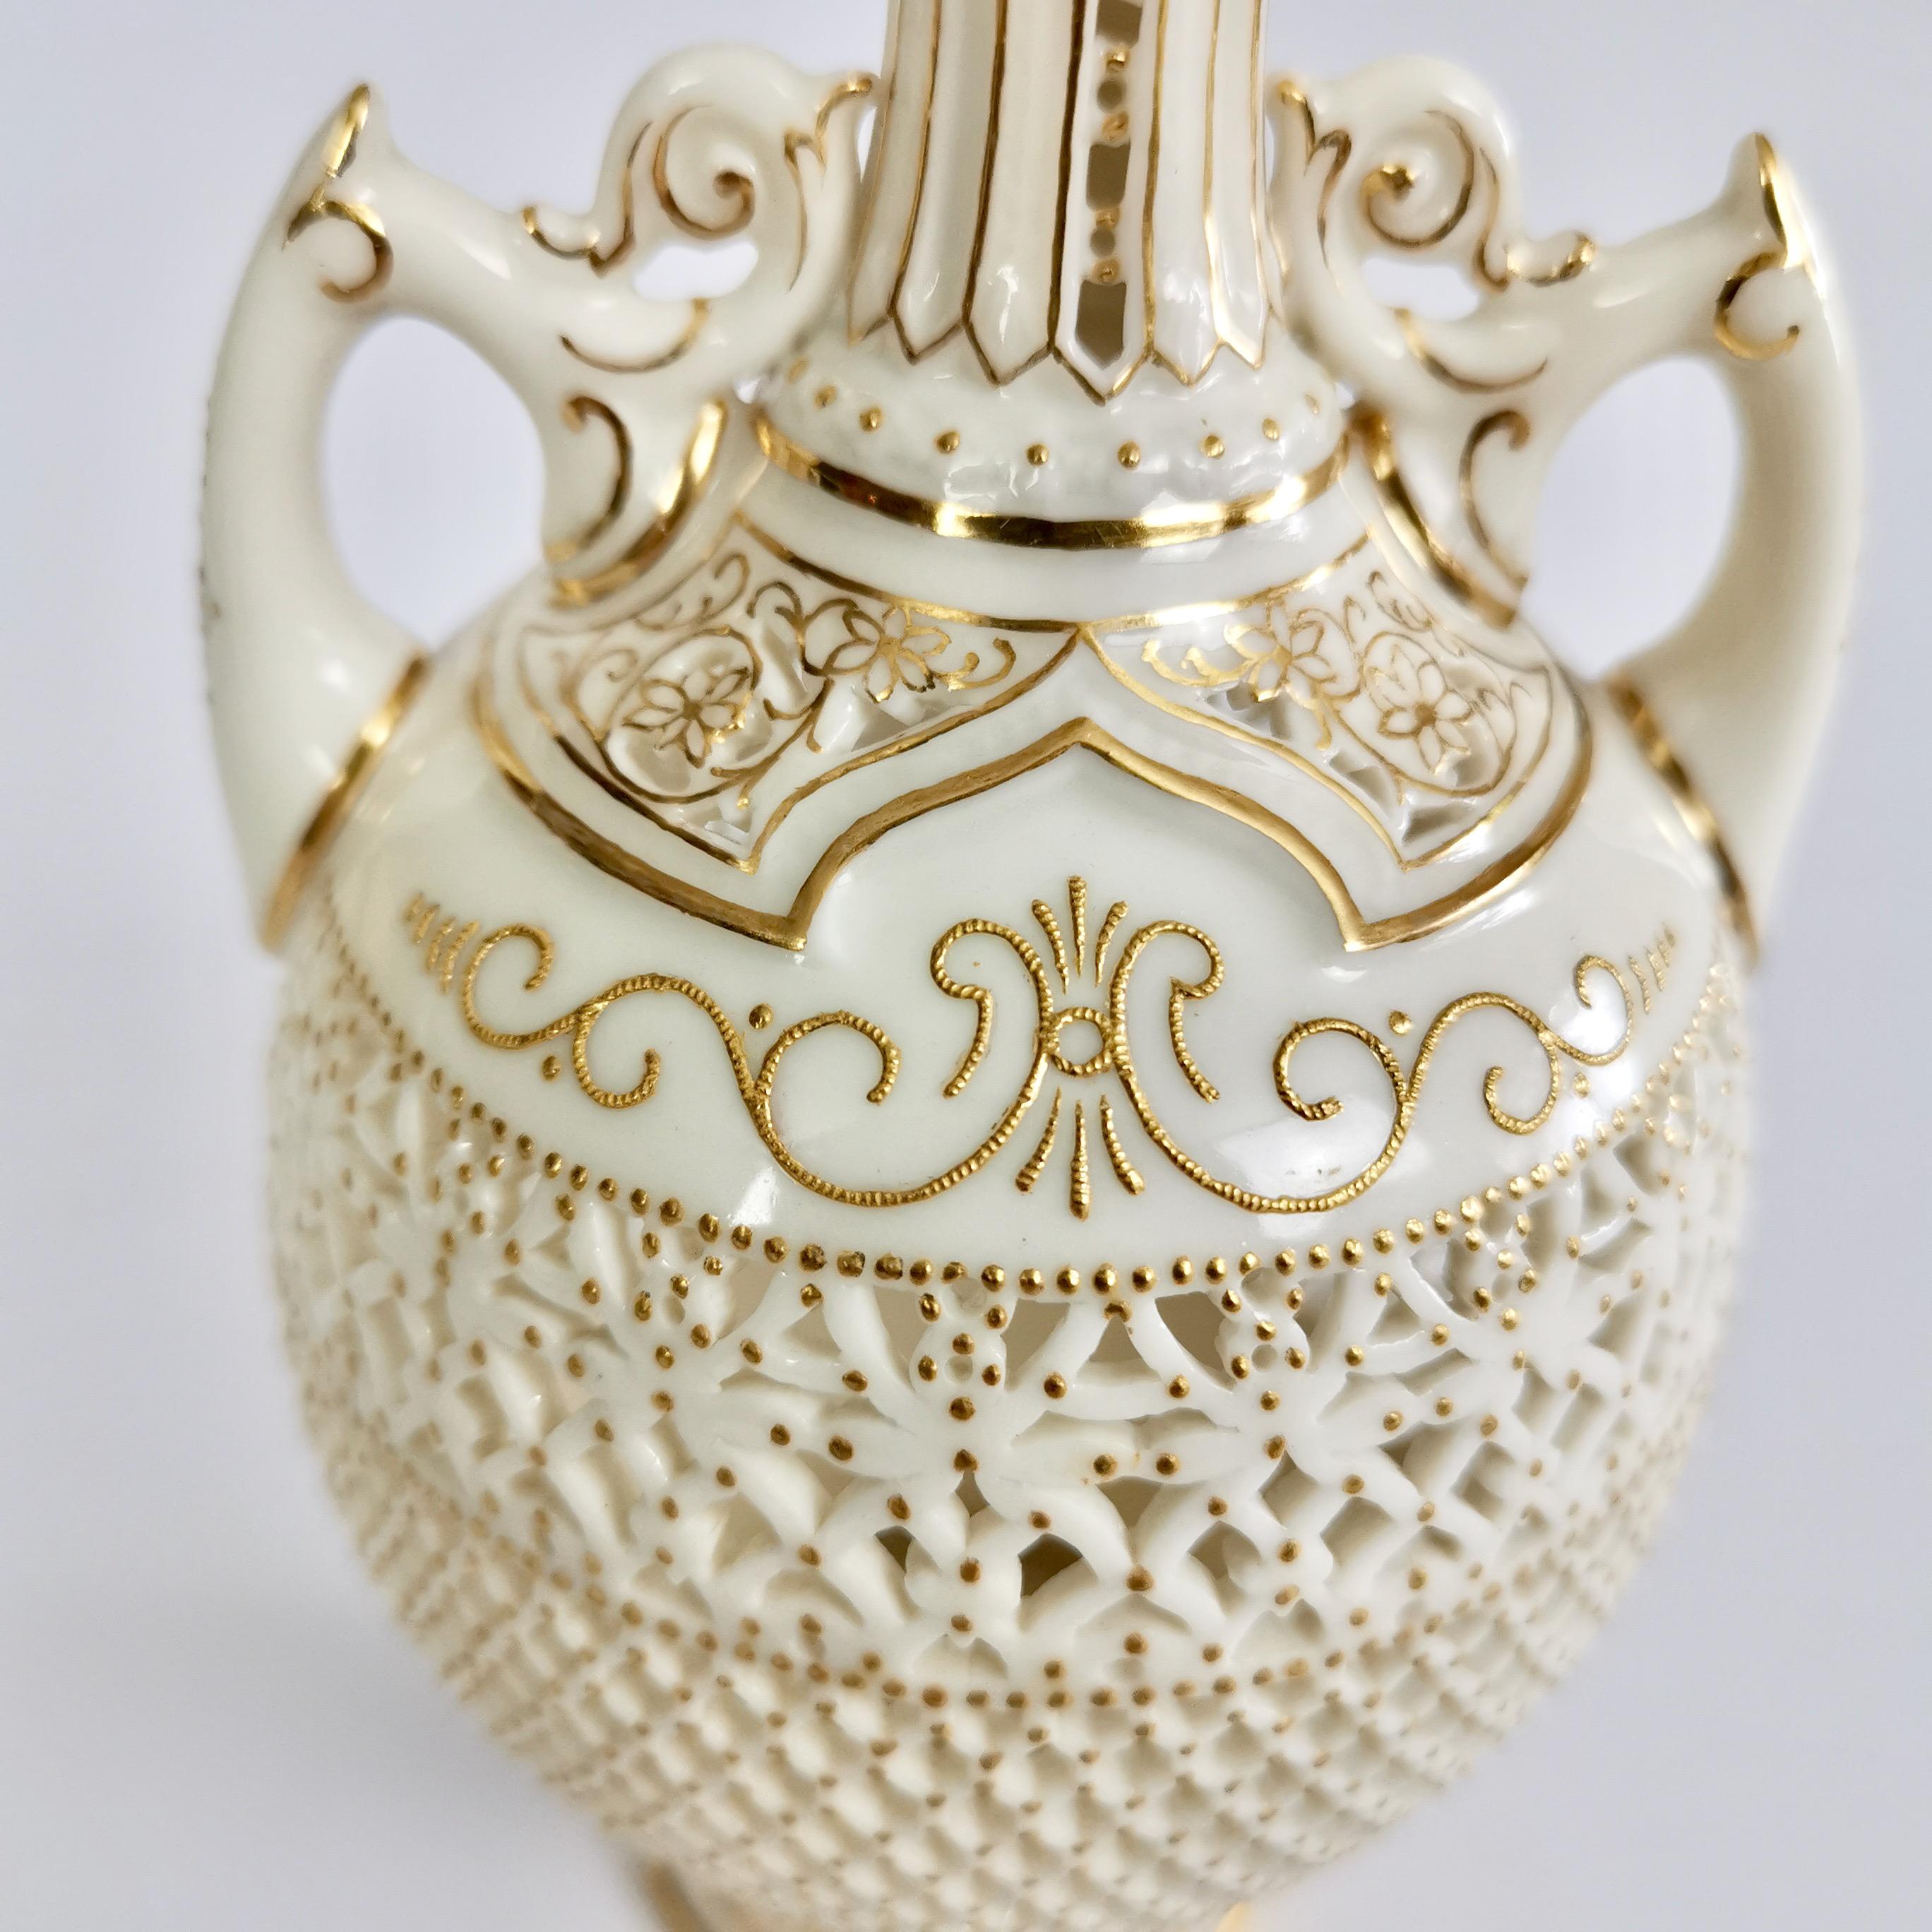 Royal Worcester Small Persian Porcelain Vase, Reticulated George Owen, 1917 3